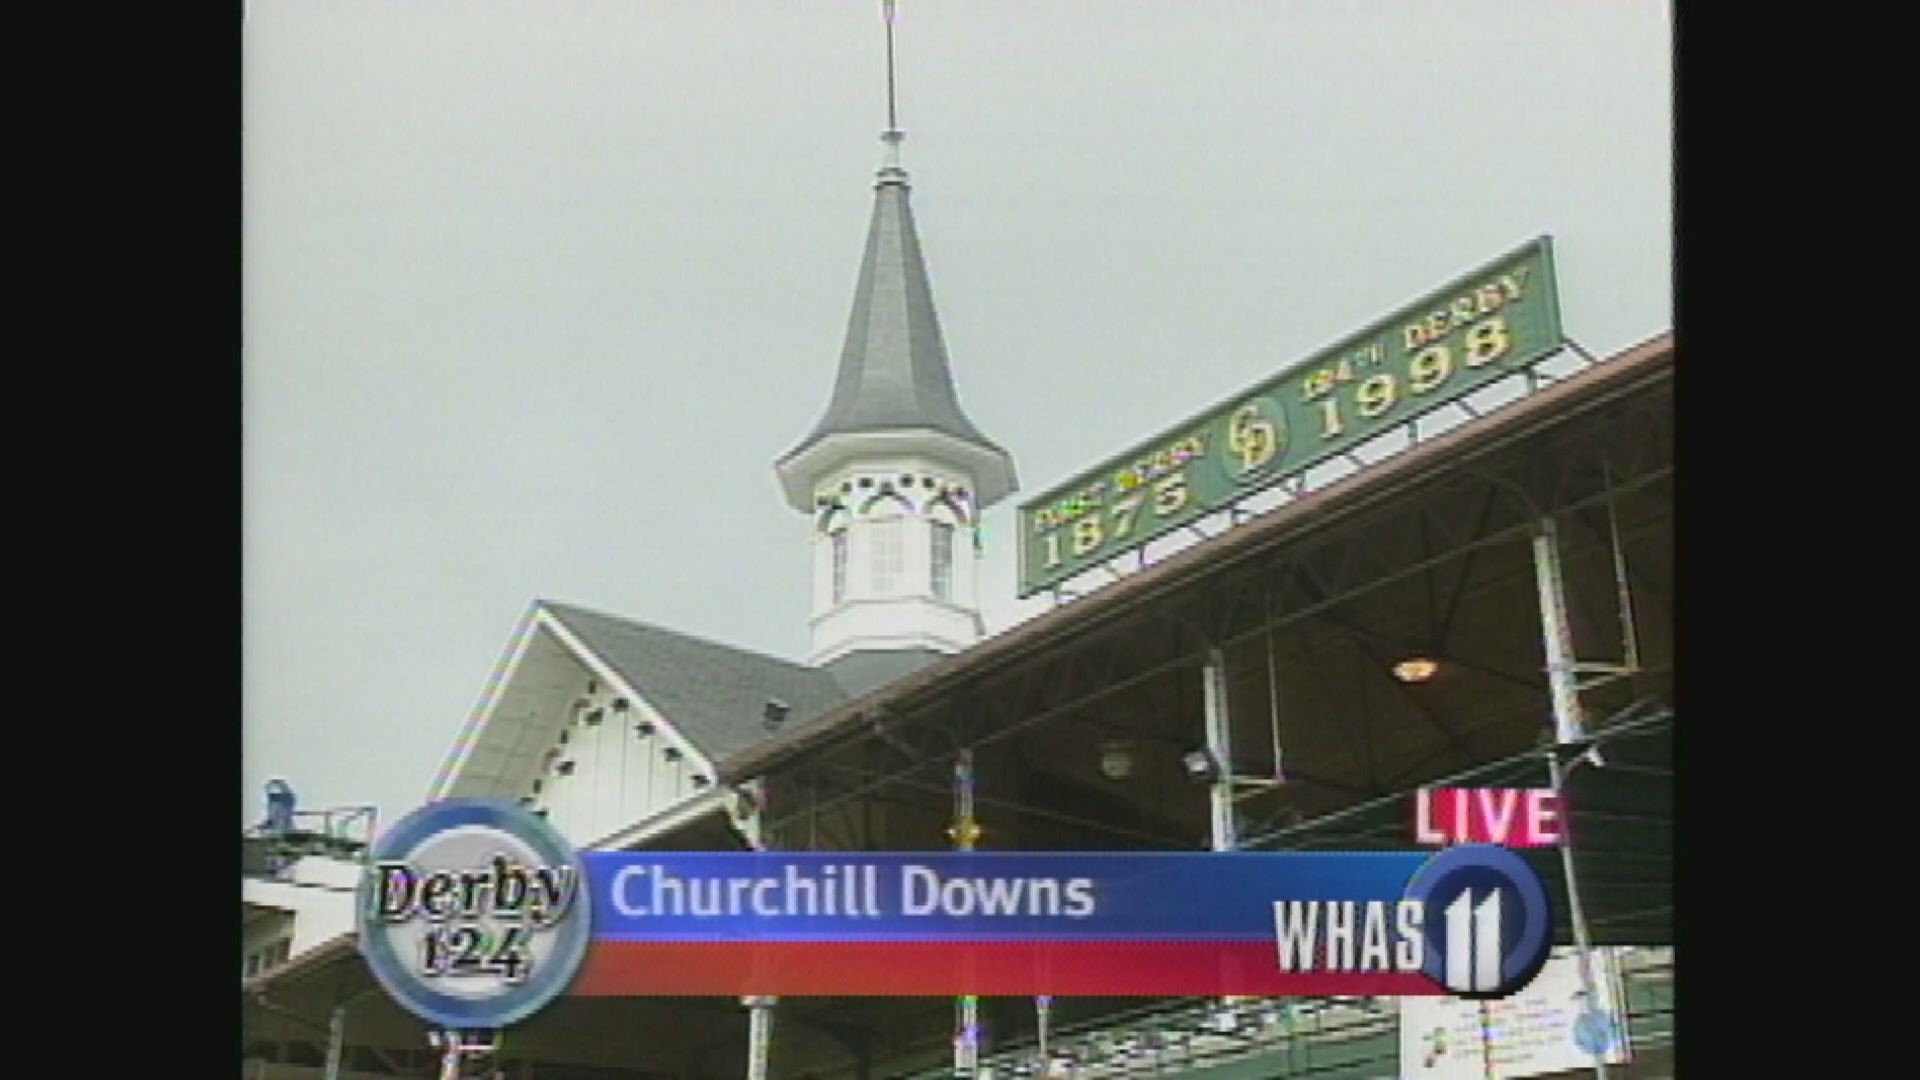 Go back in time with us to watch WHAS11's coverage of the Kentucky Derby in 1998.